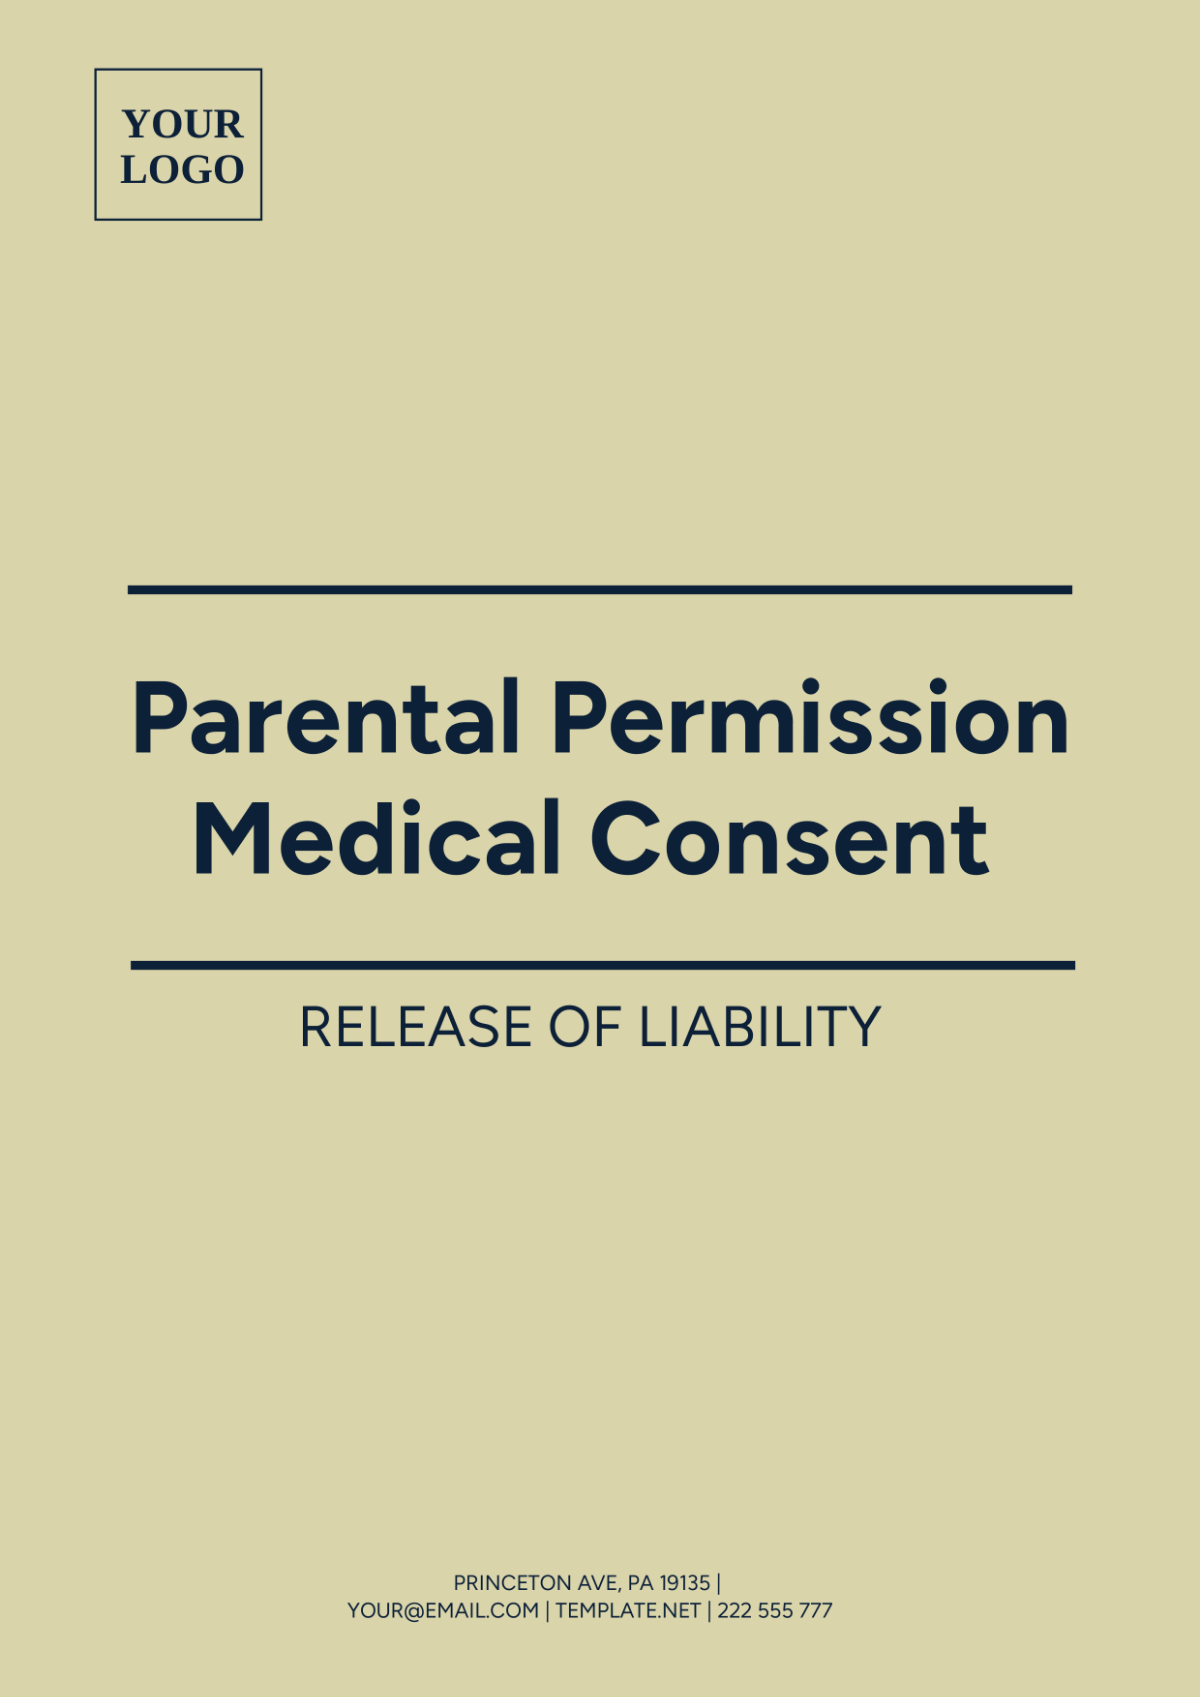 Free Parental Permission Medical Consent Release Of Liability Template